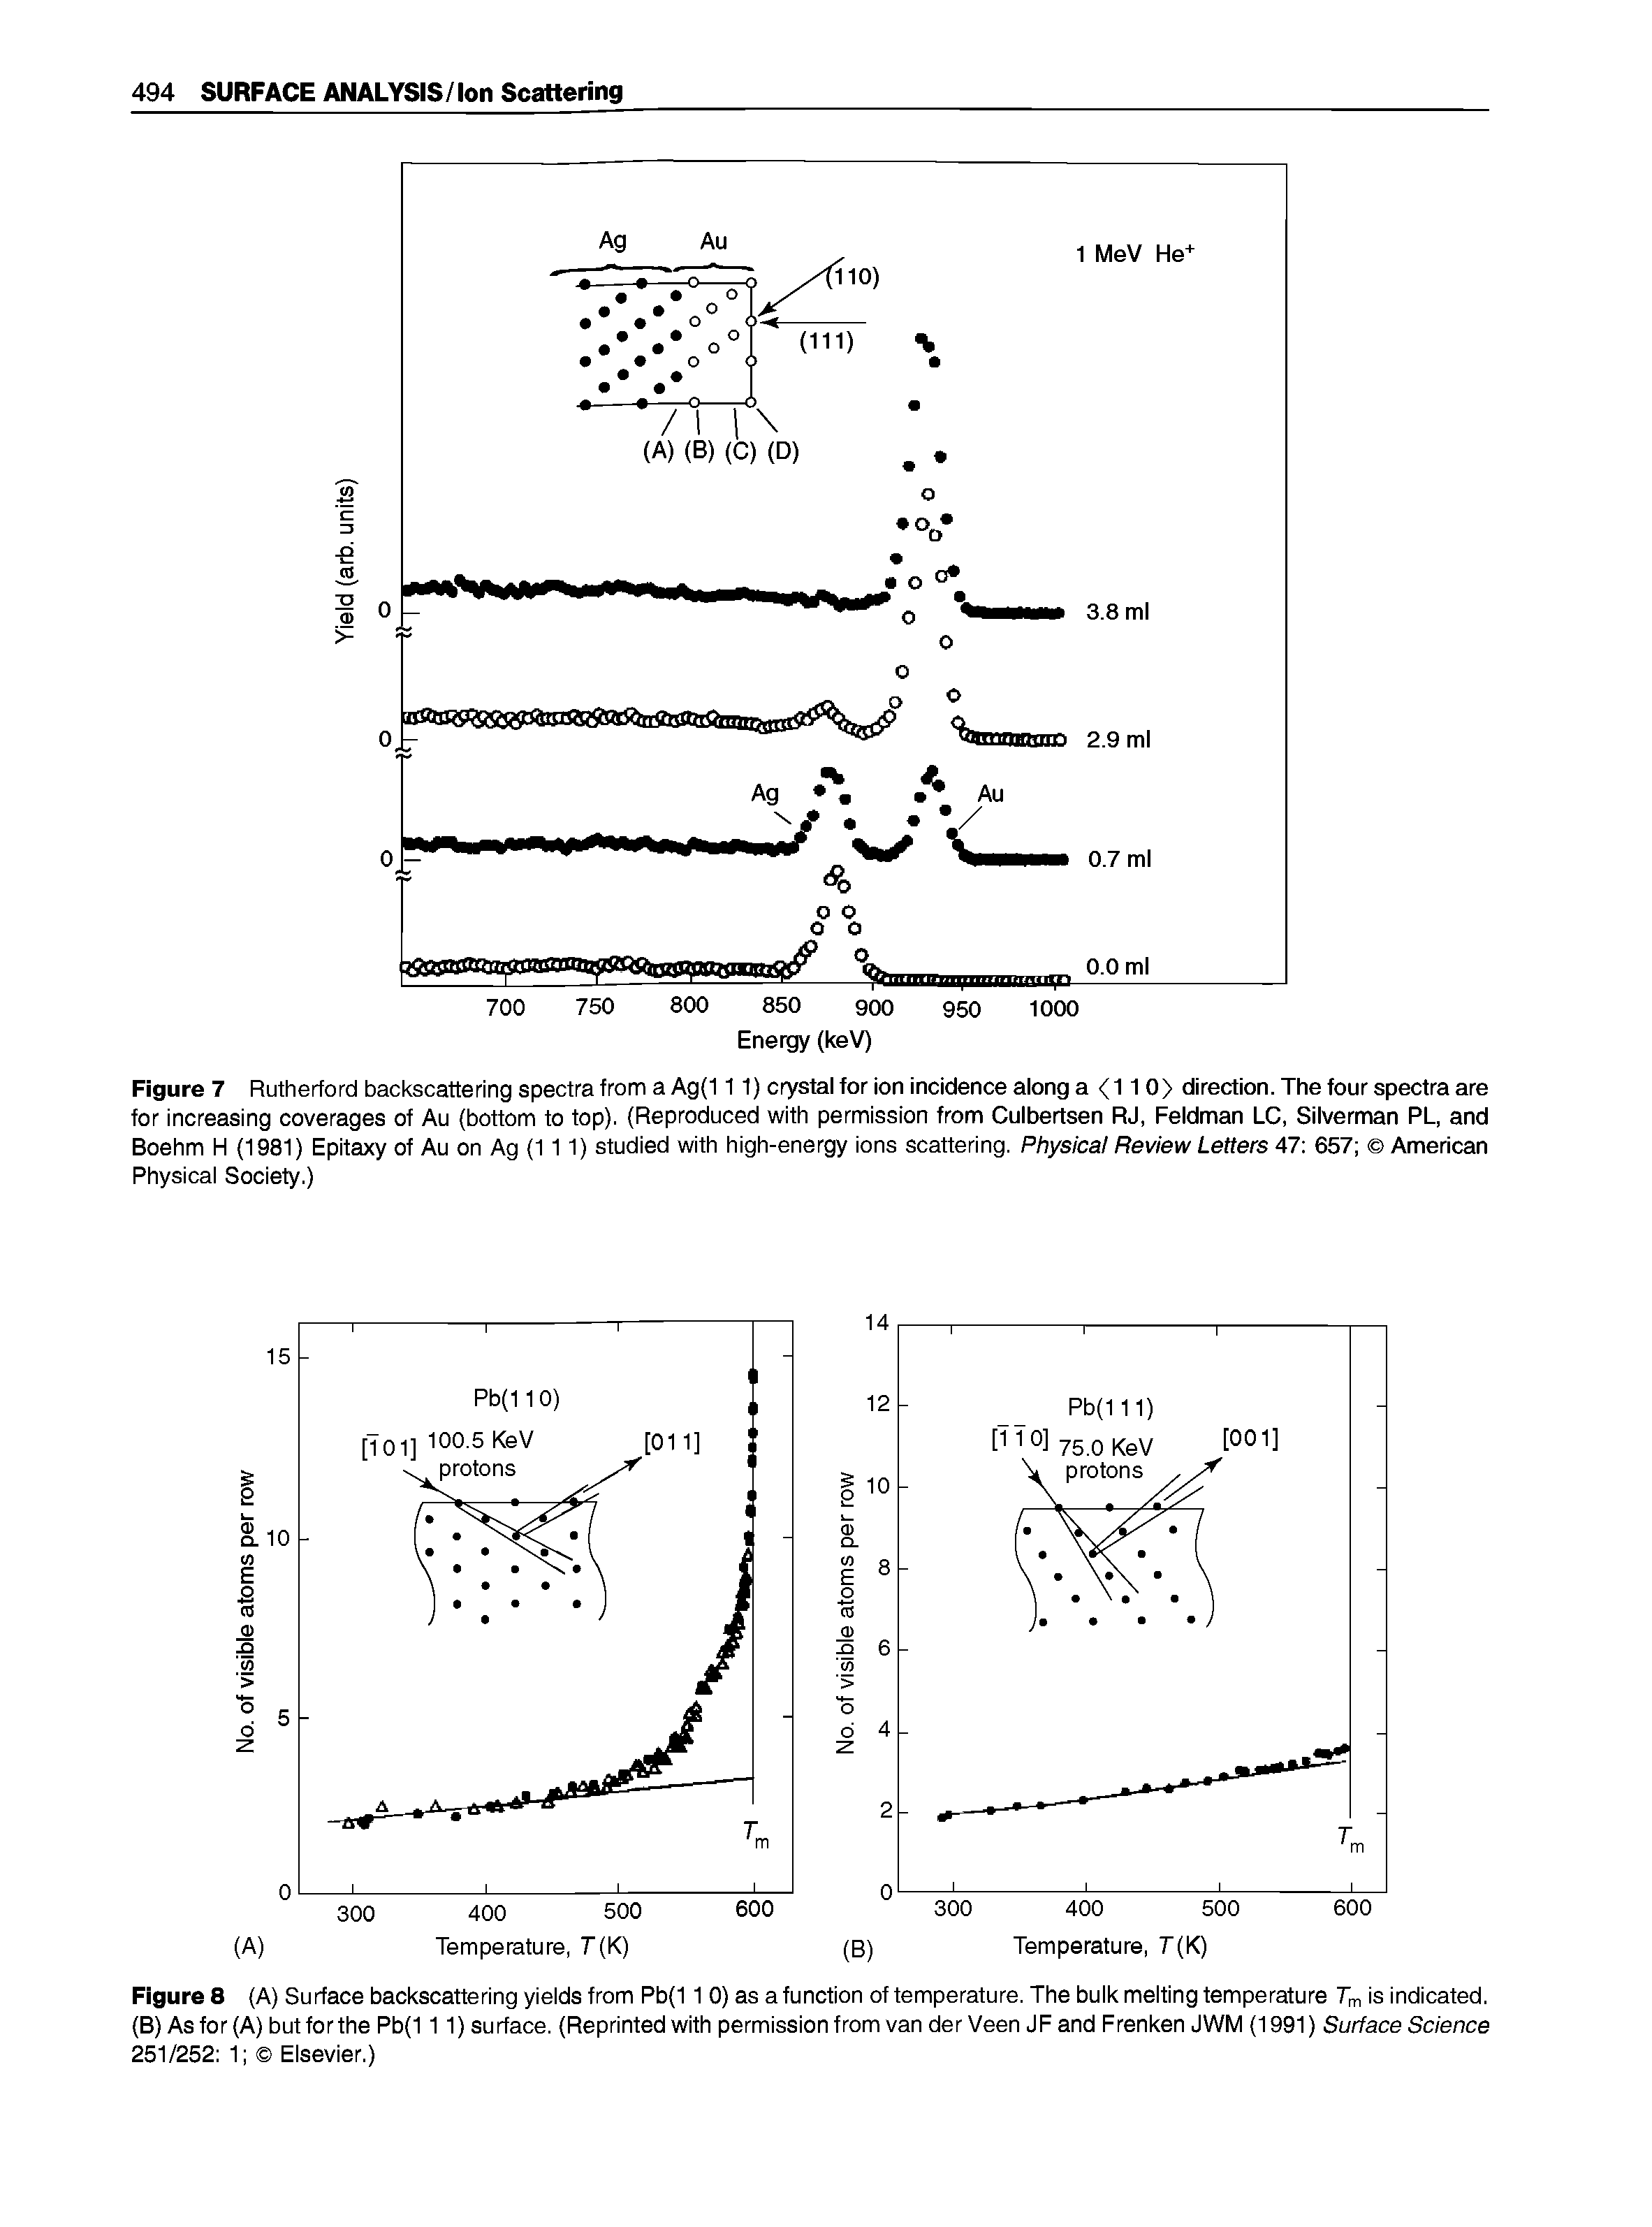 Figure 7 Rutherford backscattering spectra from a Ag(111) crystal for ion incidence along a <110> direction. The four spectra are for increasing coverages of Au (bottom to top). (Reproduced with permission from Culbertsen RJ, Feldman LC, Silverman PL, and Boehm H (1981) Epitaxy of Au on Ag (111) studied with high-energy ions scattering. Physical Review Letters 47 657 American Physical Society.)...